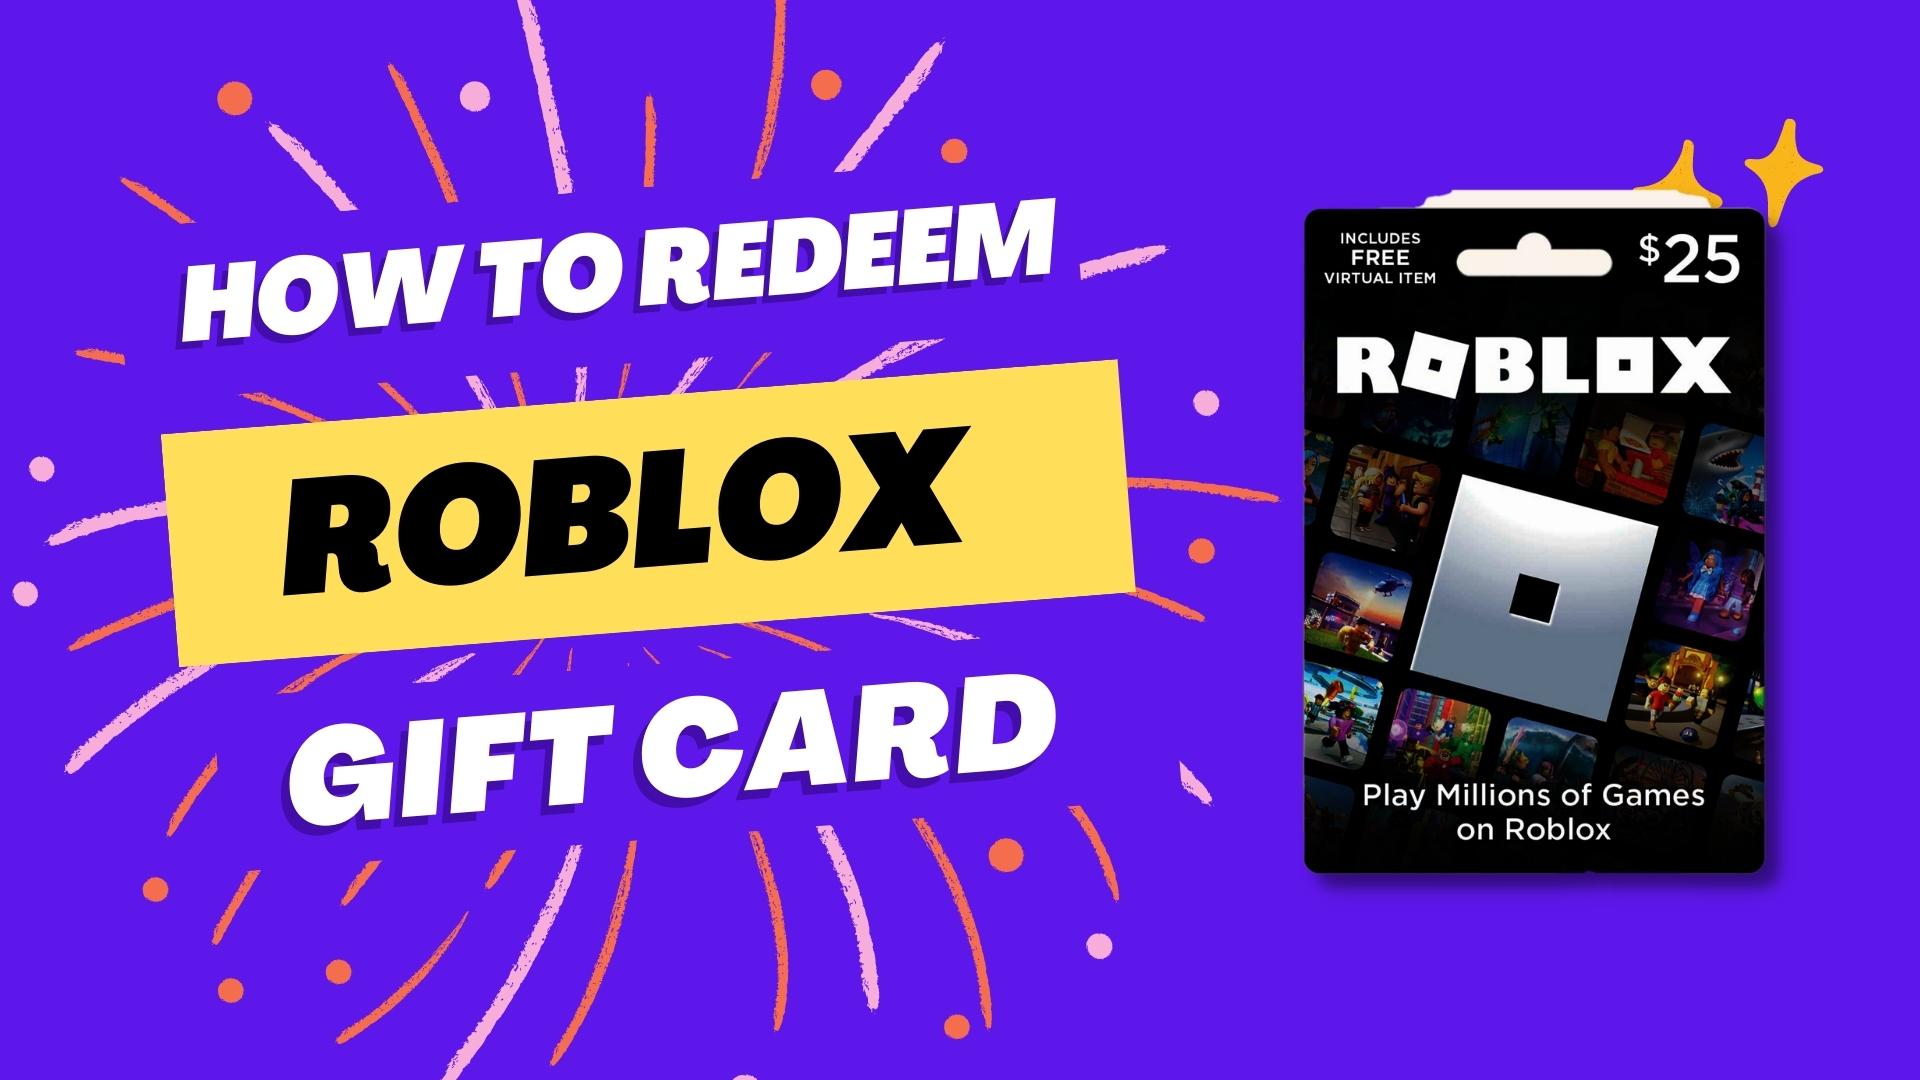 How To Redeem Roblox Gift Card On Phone - Full Guide 